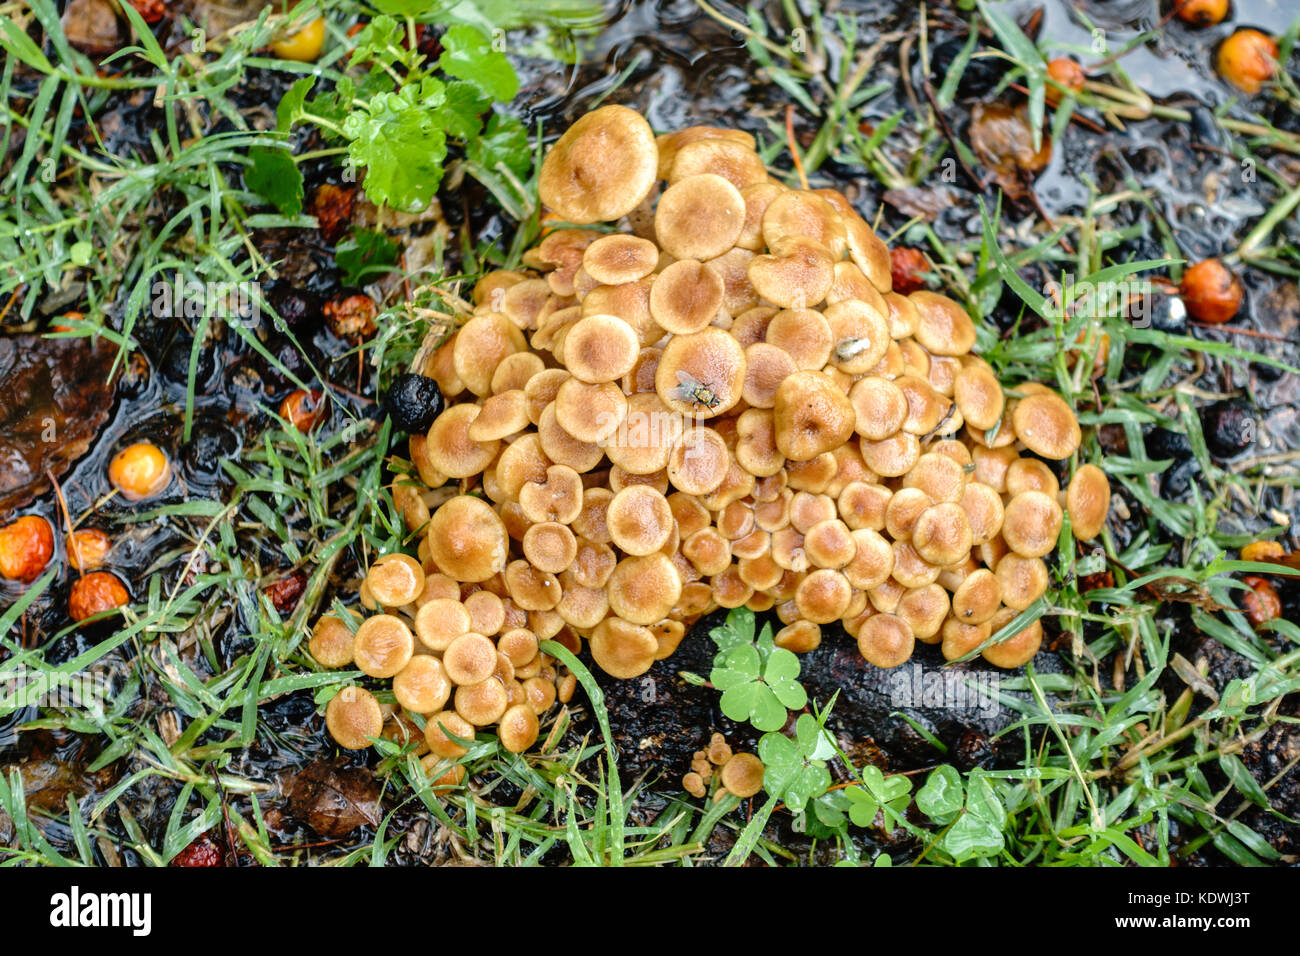 A patch of Honey fungus mushrooms, Armillaria mellea, growing around Crabapple, malus, tree roots in an urban lawn in Oklahoma City, Oklahoma, USA. Stock Photo